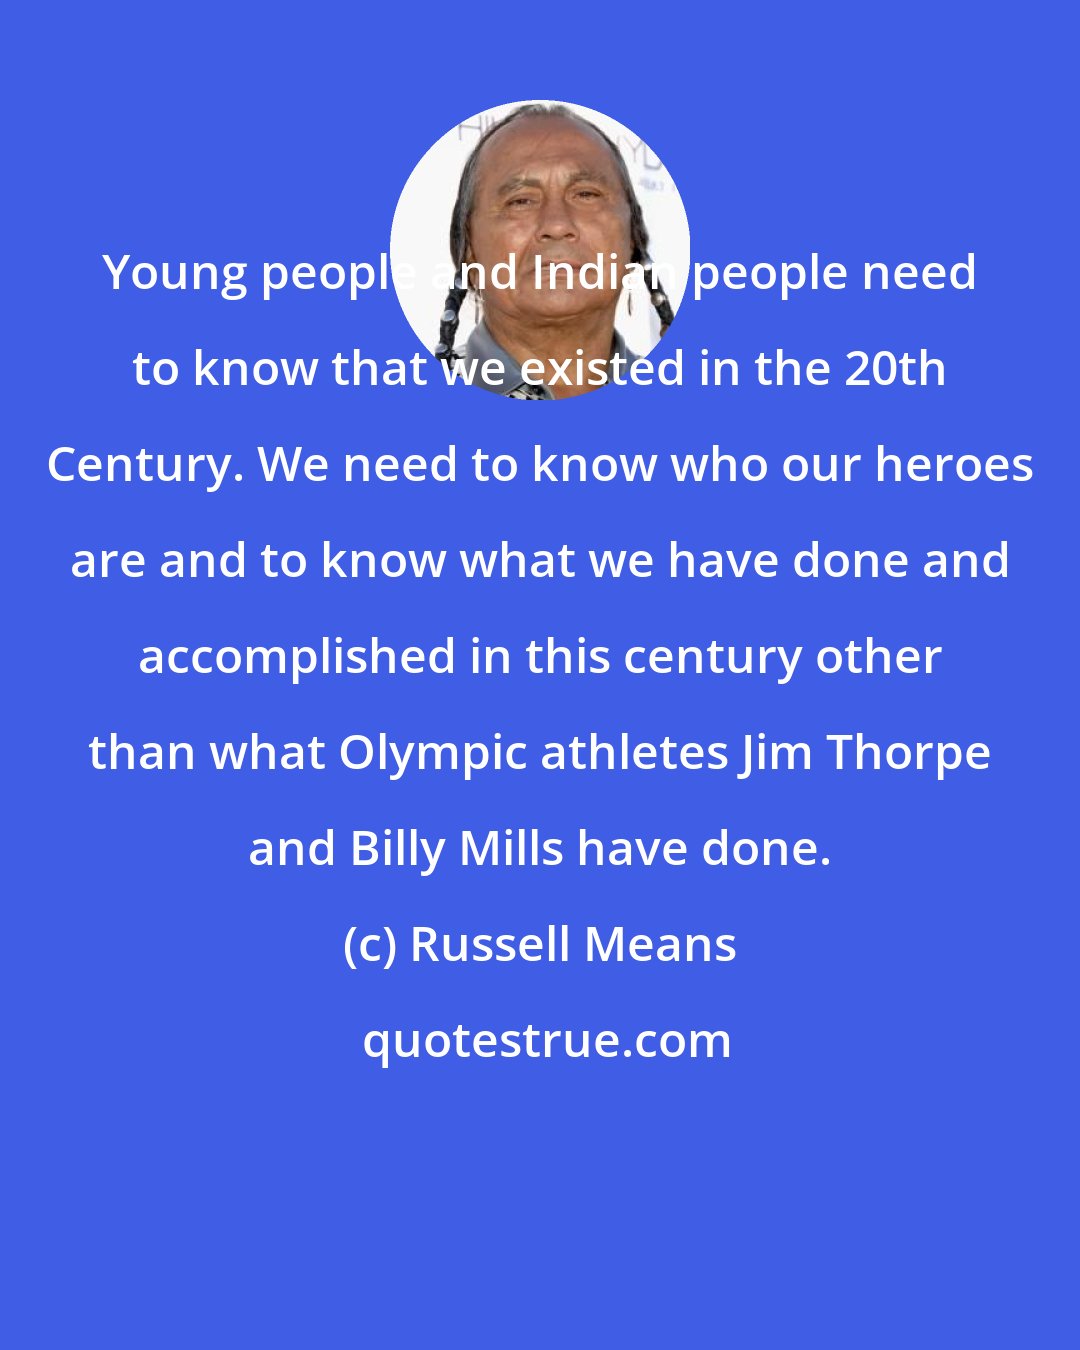 Russell Means: Young people and Indian people need to know that we existed in the 20th Century. We need to know who our heroes are and to know what we have done and accomplished in this century other than what Olympic athletes Jim Thorpe and Billy Mills have done.